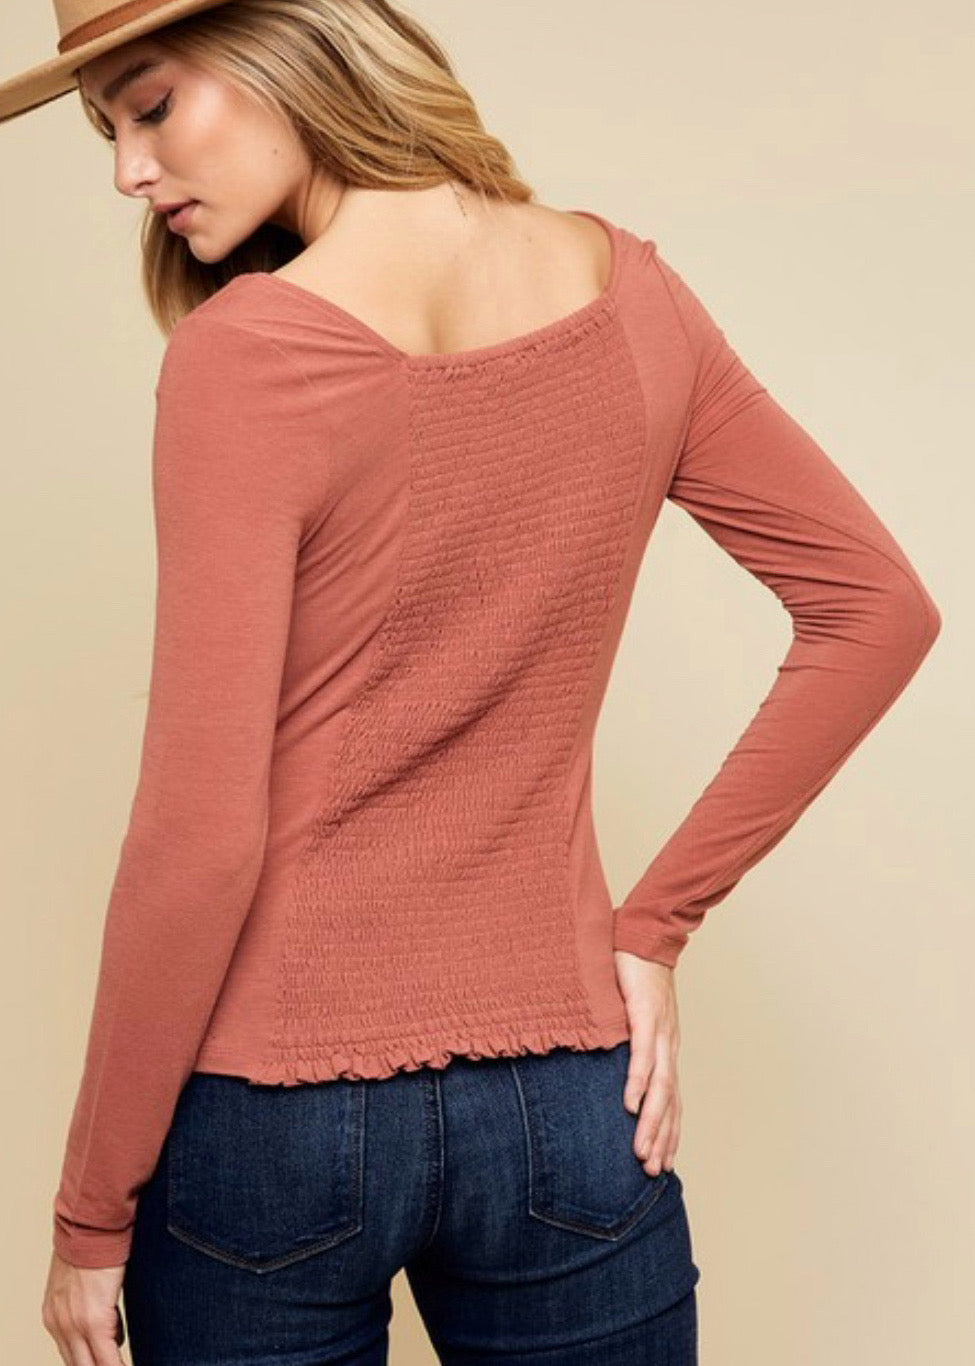 Square neckline top in a pretty terracotta color long sleeve top and smocked back. Fitted style top. 